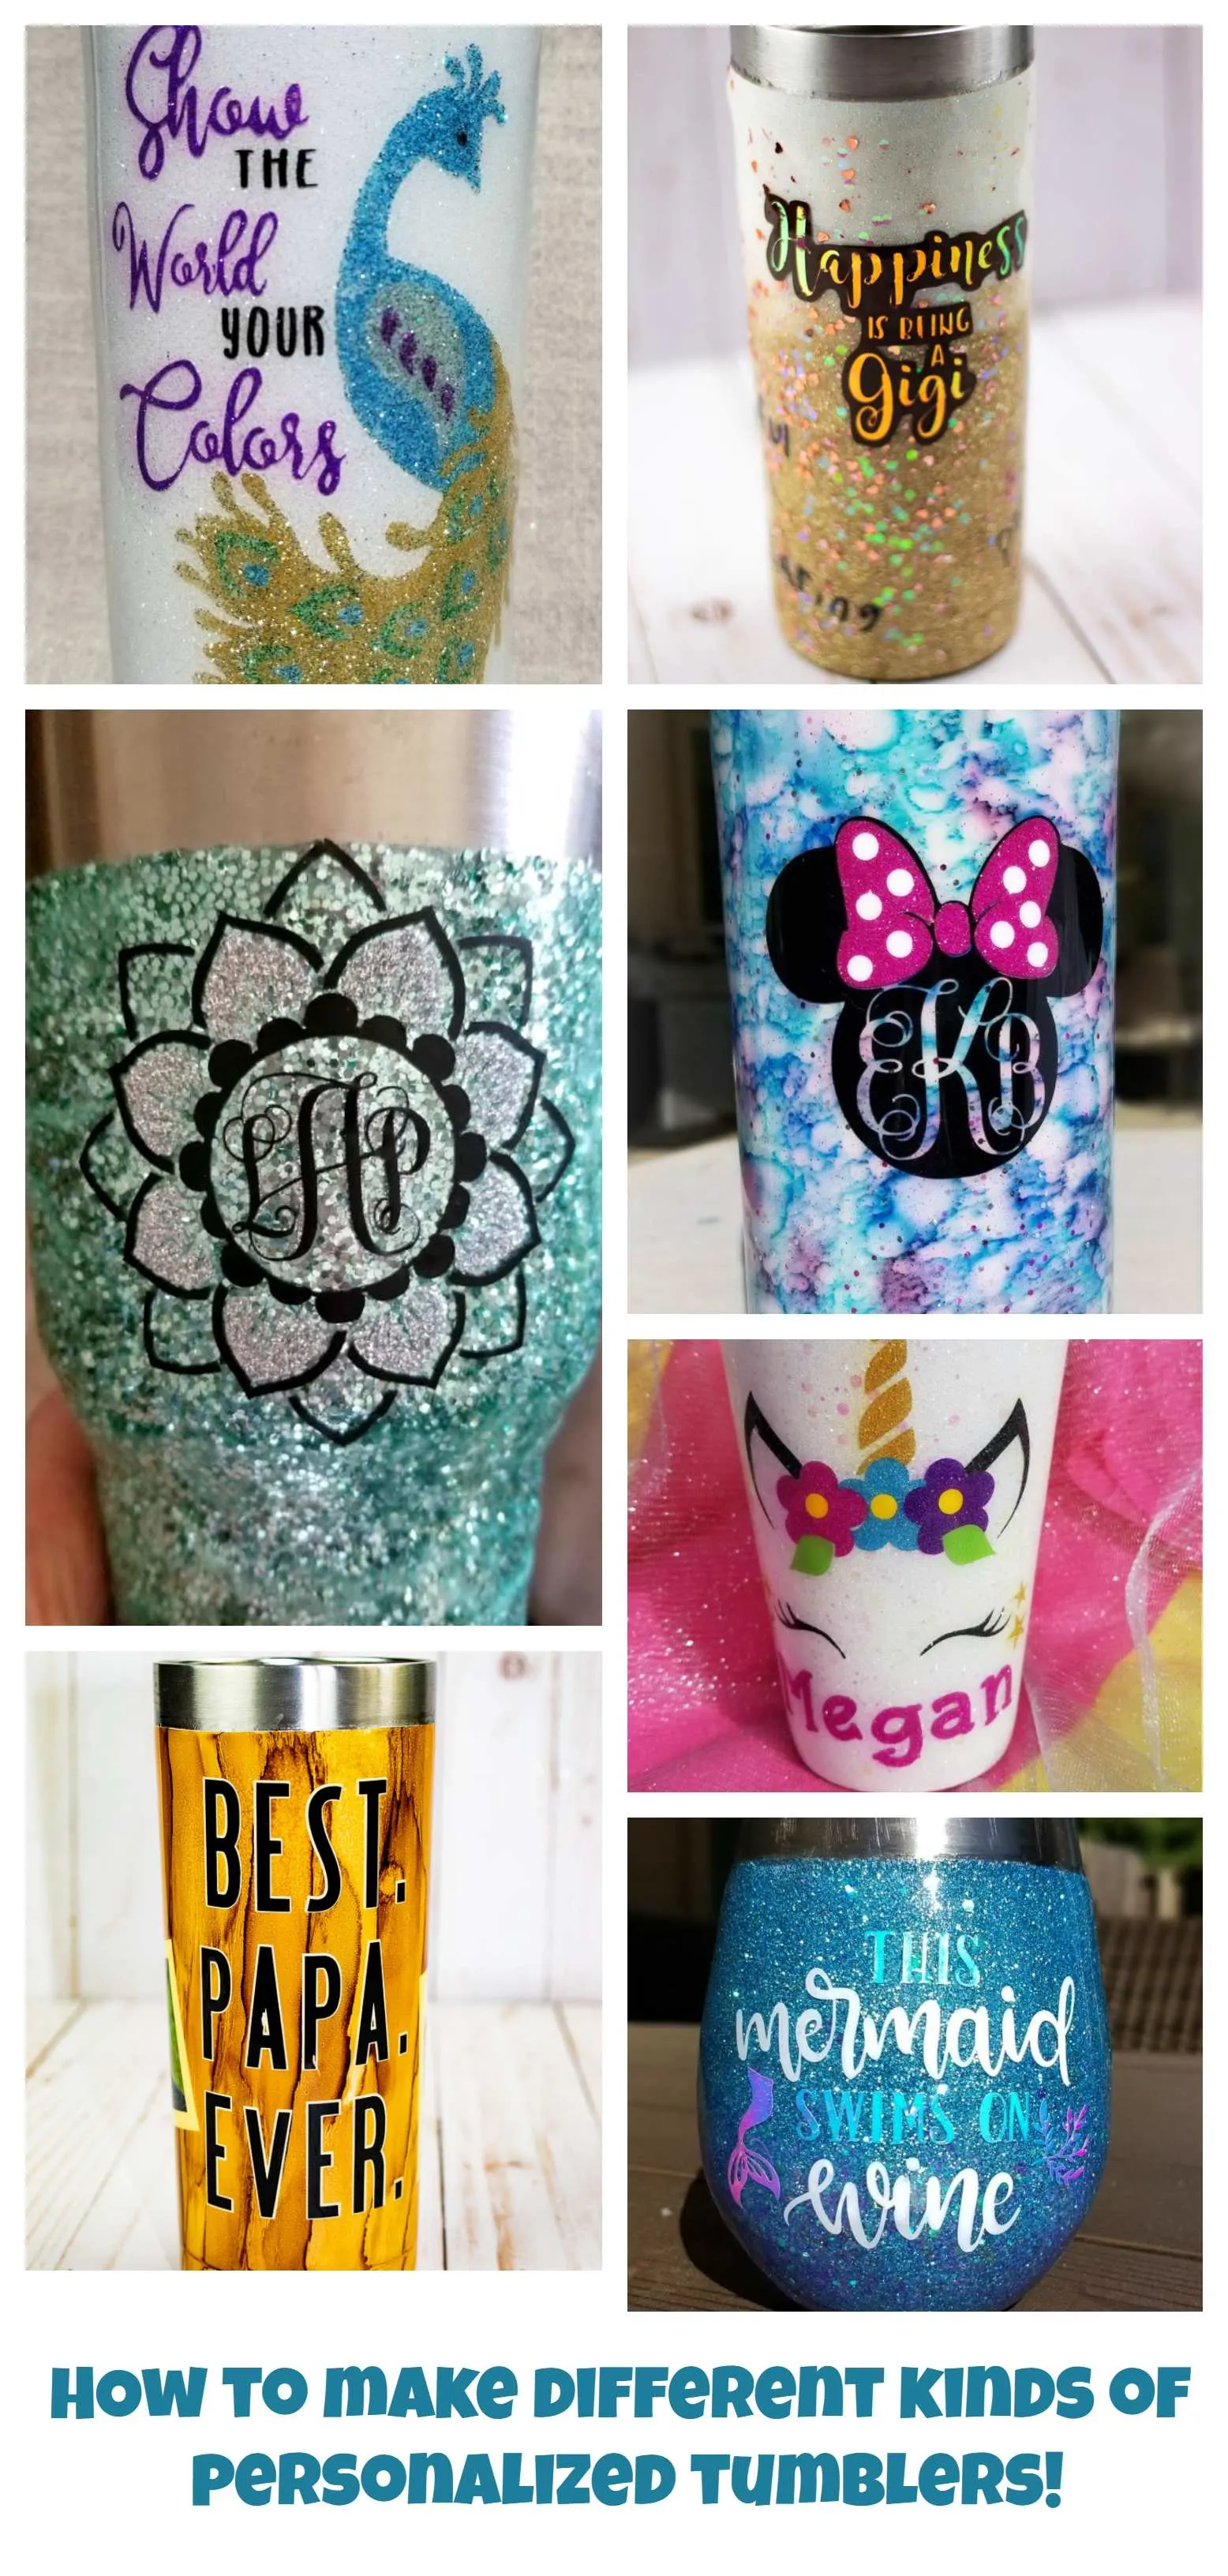 https://leapoffaithcrafting.com/wp-content/uploads/2019/03/personalized-tumblers-pin.jpg.webp